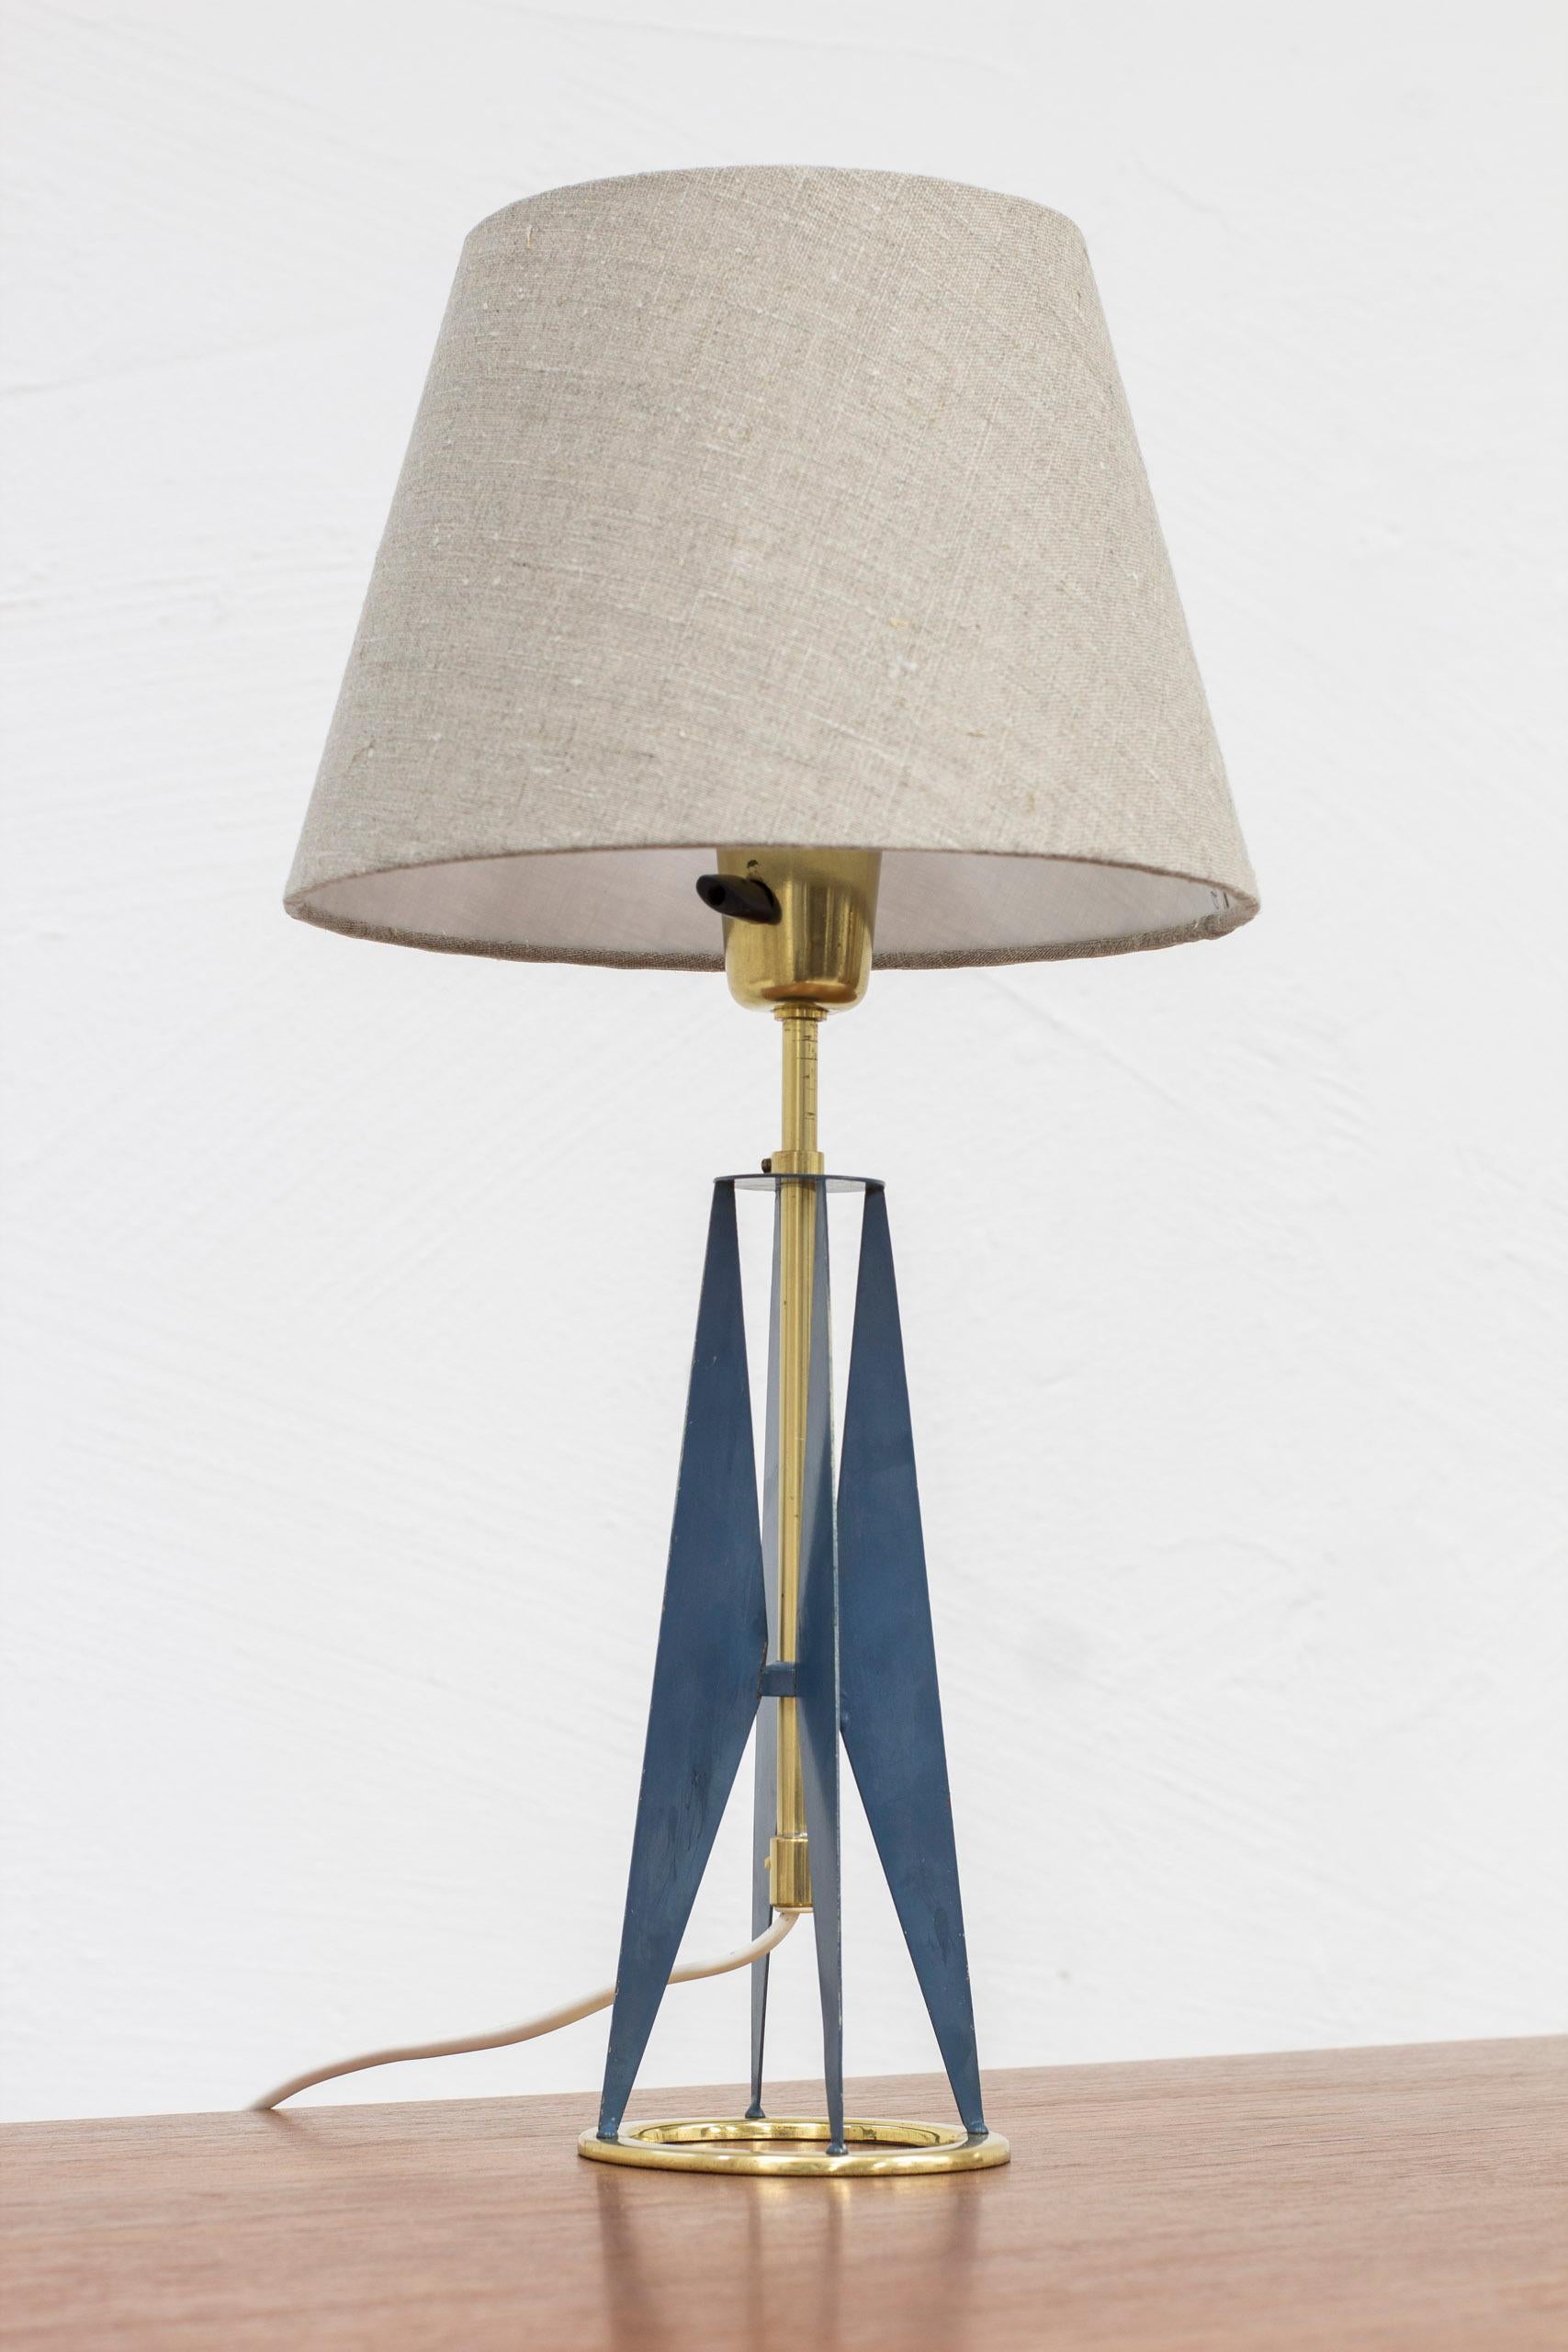 Table lamp produced in Sweden by Falkenbergs Belysning. Made sometime during the 1950s. Made from polished brass and metal with original blue paint. Original bakelite turn light switch in working order. New lamp shade in grey linen fabric. Good